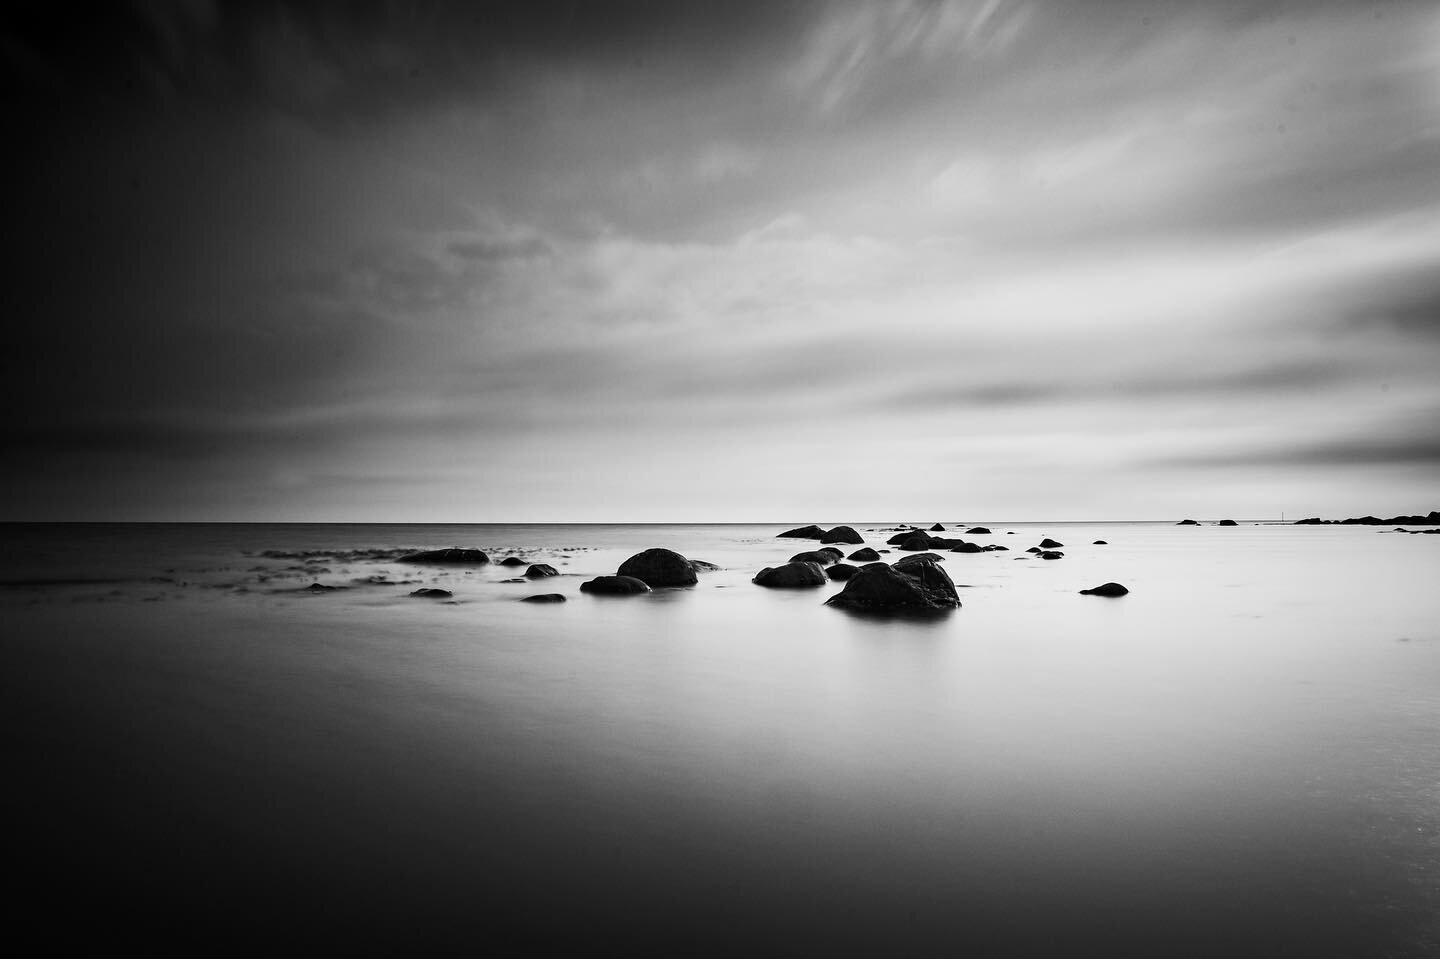 Slowscape - I love the effect long shutterspeeds have on water. This is from J&aelig;ren on the west coast of Norway - a beautiful region. 

#j&aelig;ren #norway #blackandwhite #blackandwhitephotography #bwphotography #landscape #landscapephotography